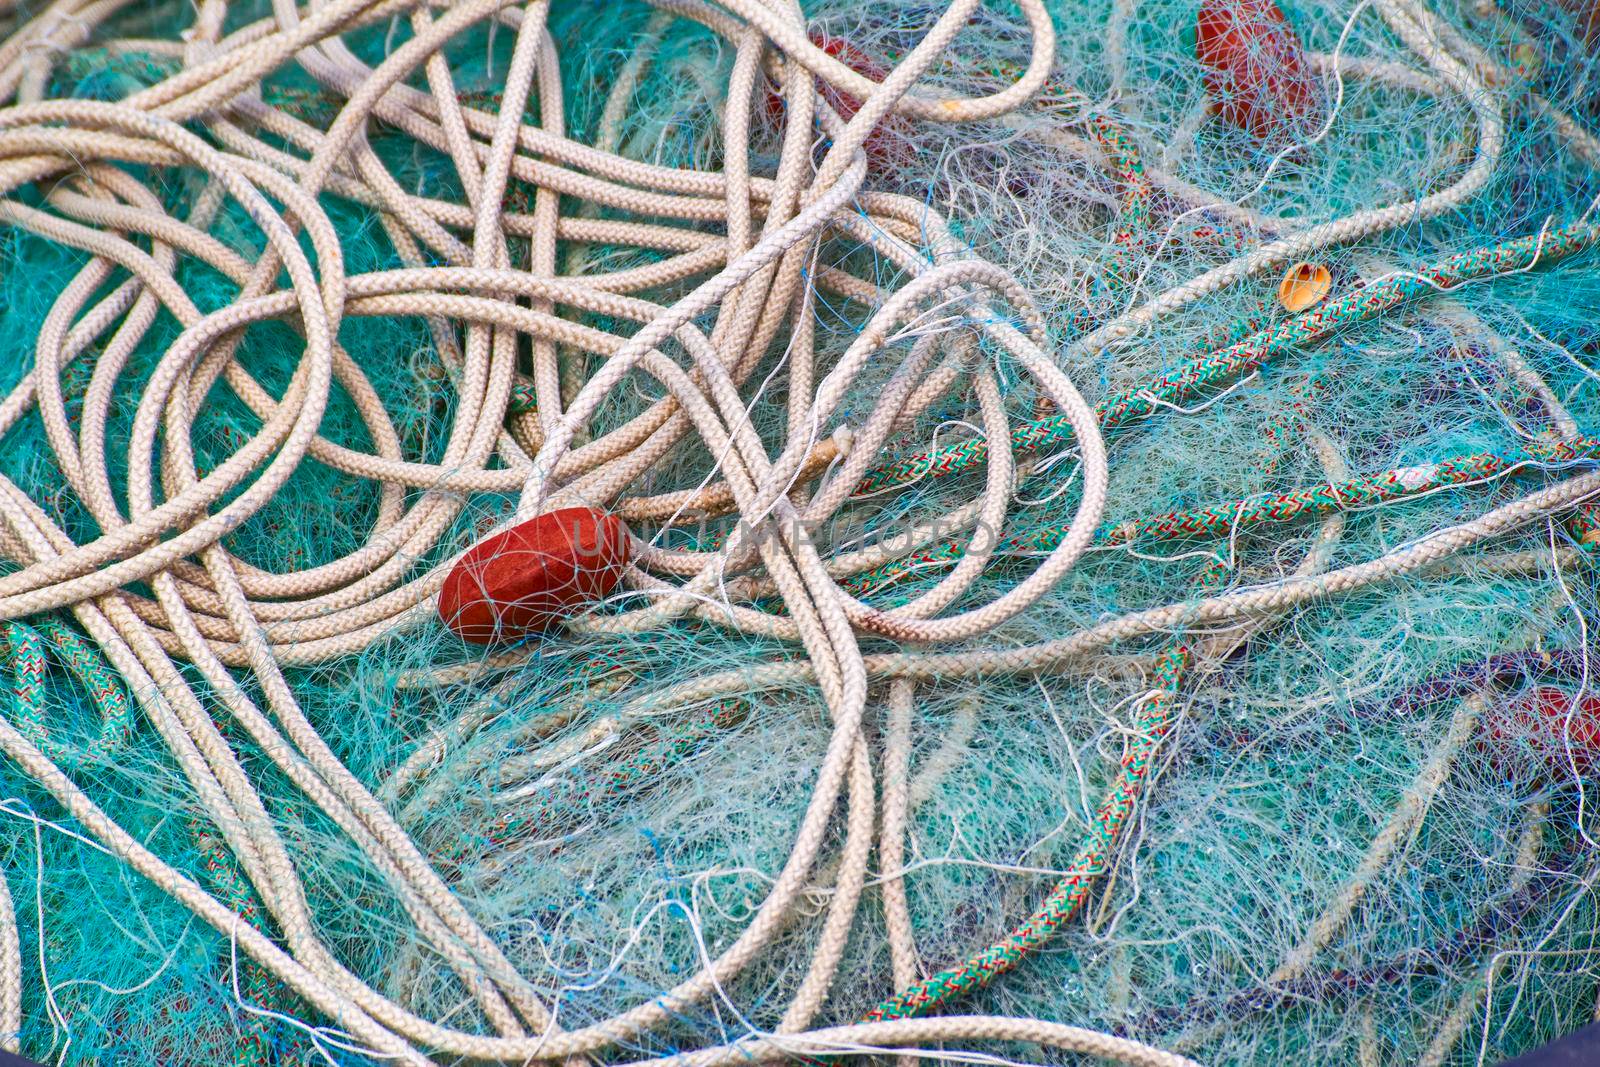 Net used to catch fish.